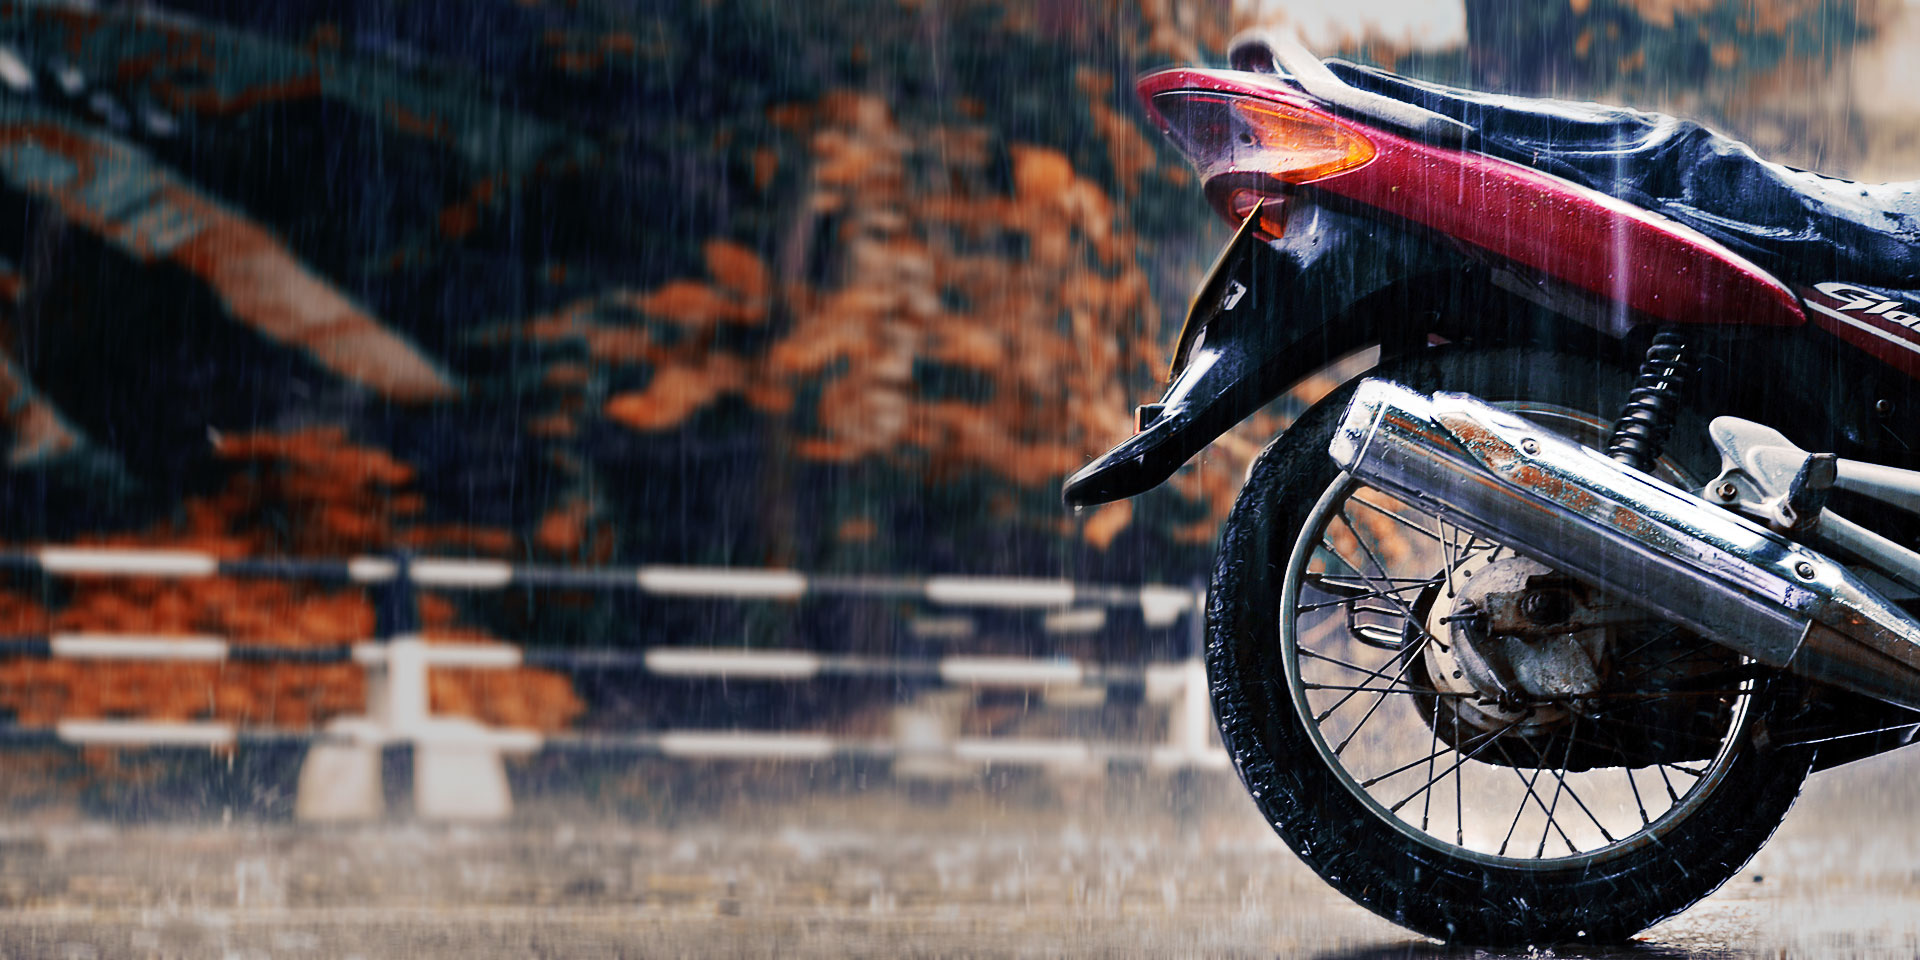 Is it bad to leave a bike in the rain?